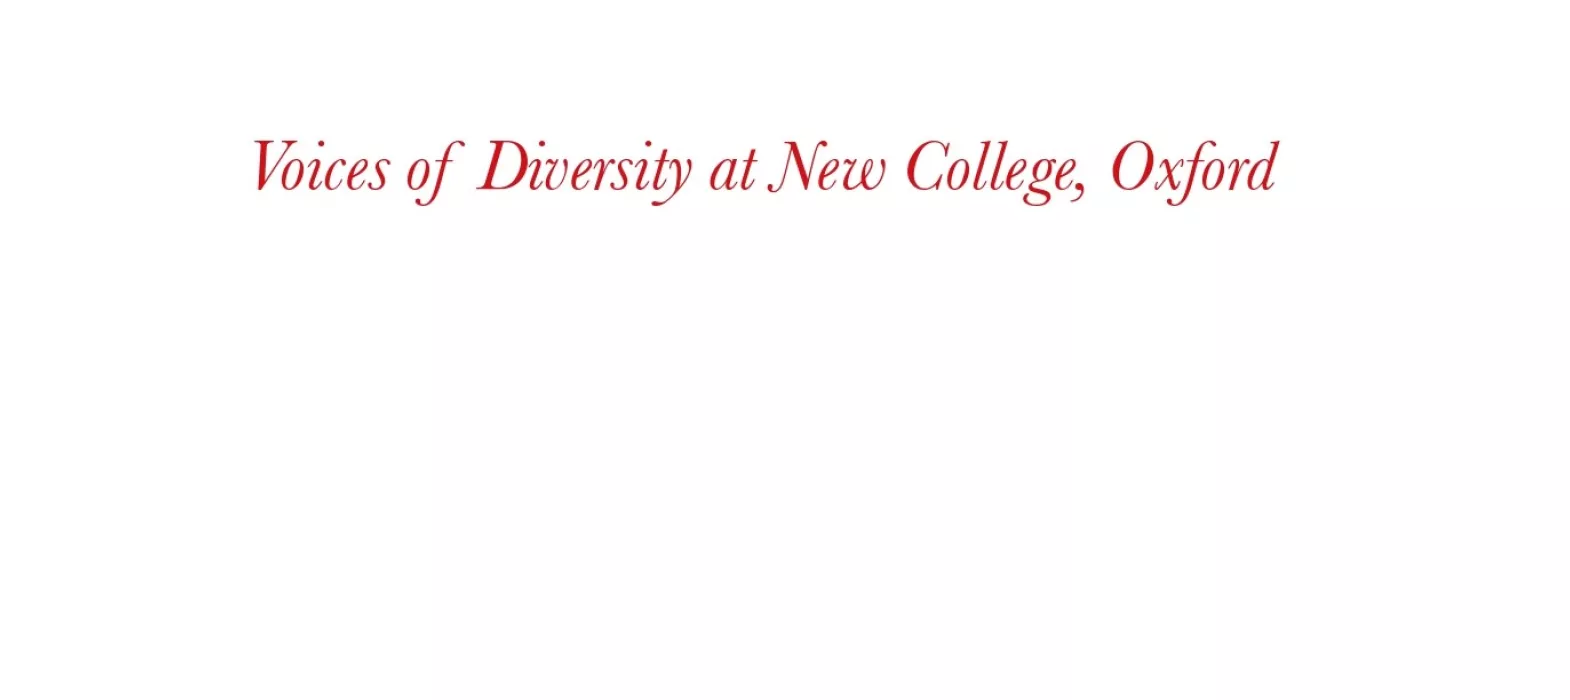 Voices of Diversity at New College, Oxford